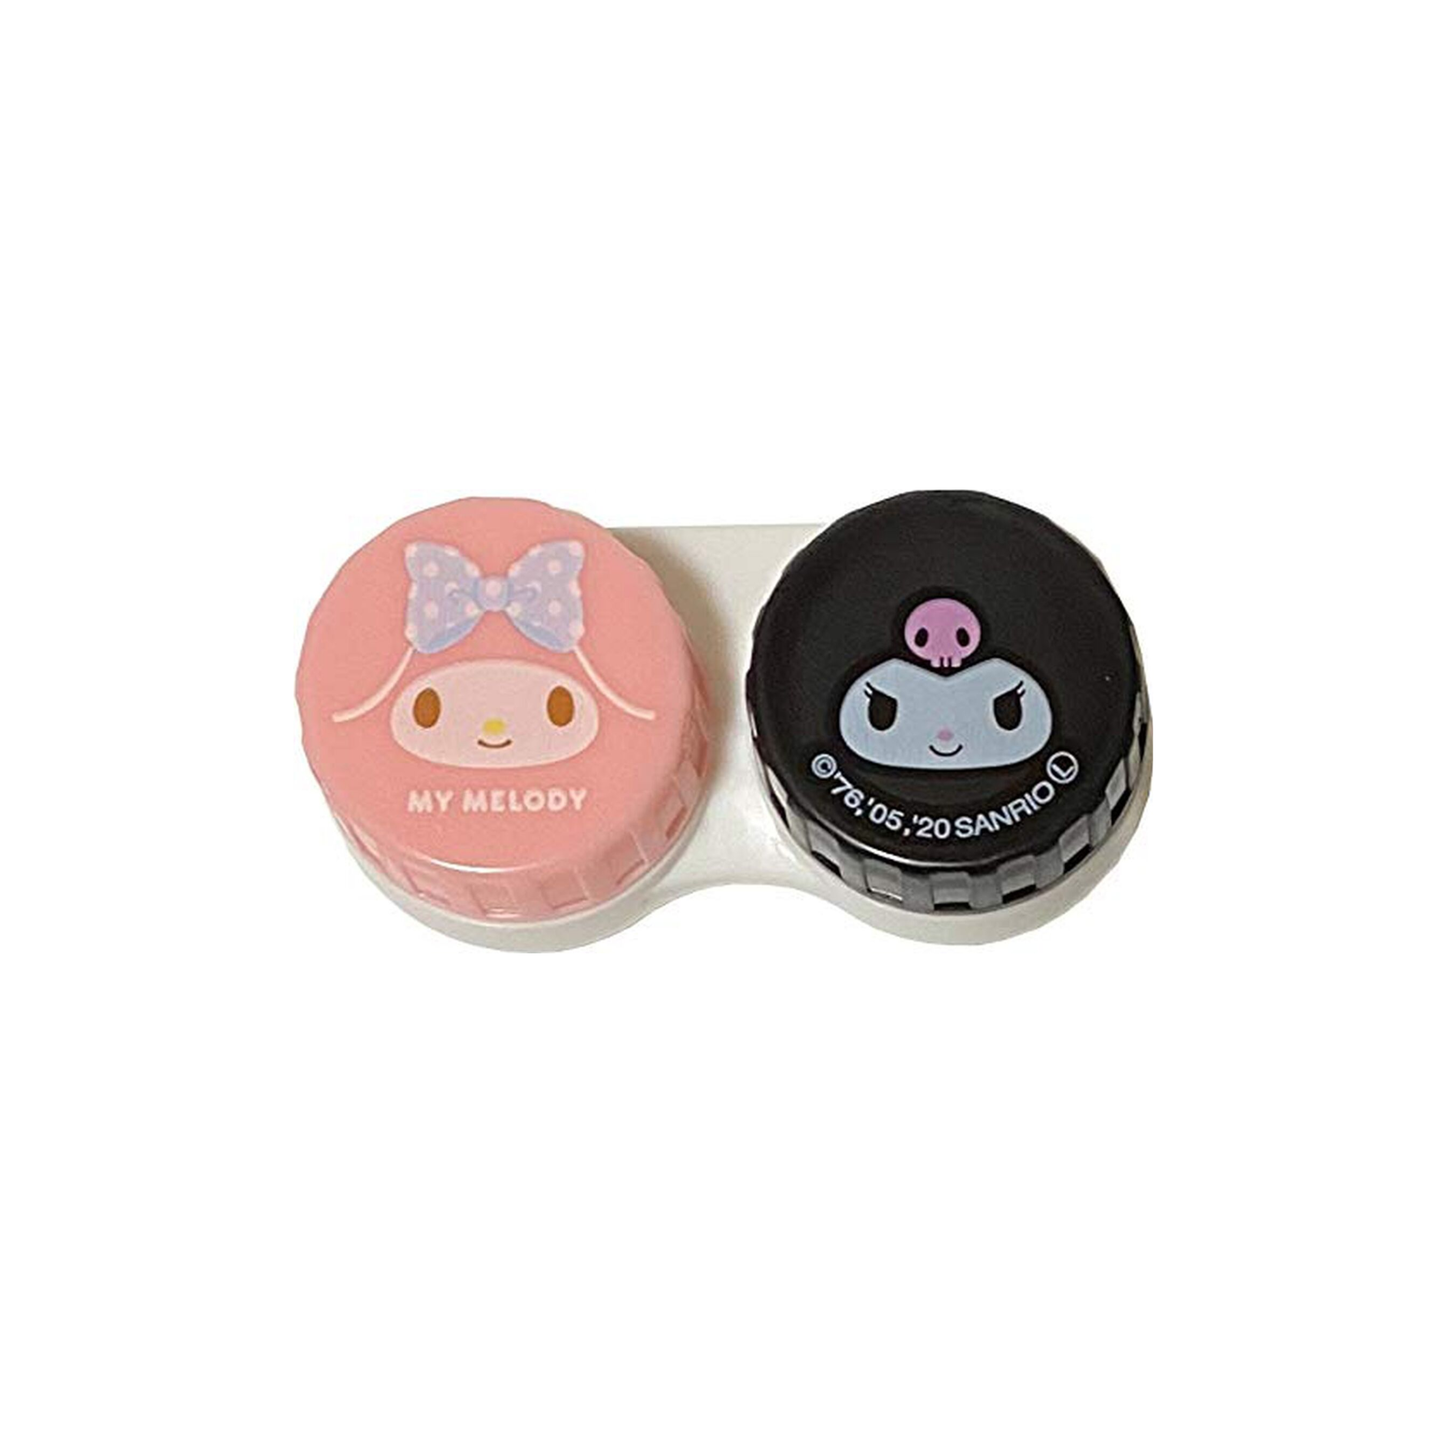 CONTACT LENS CASE MY MELODY AND KUROMI